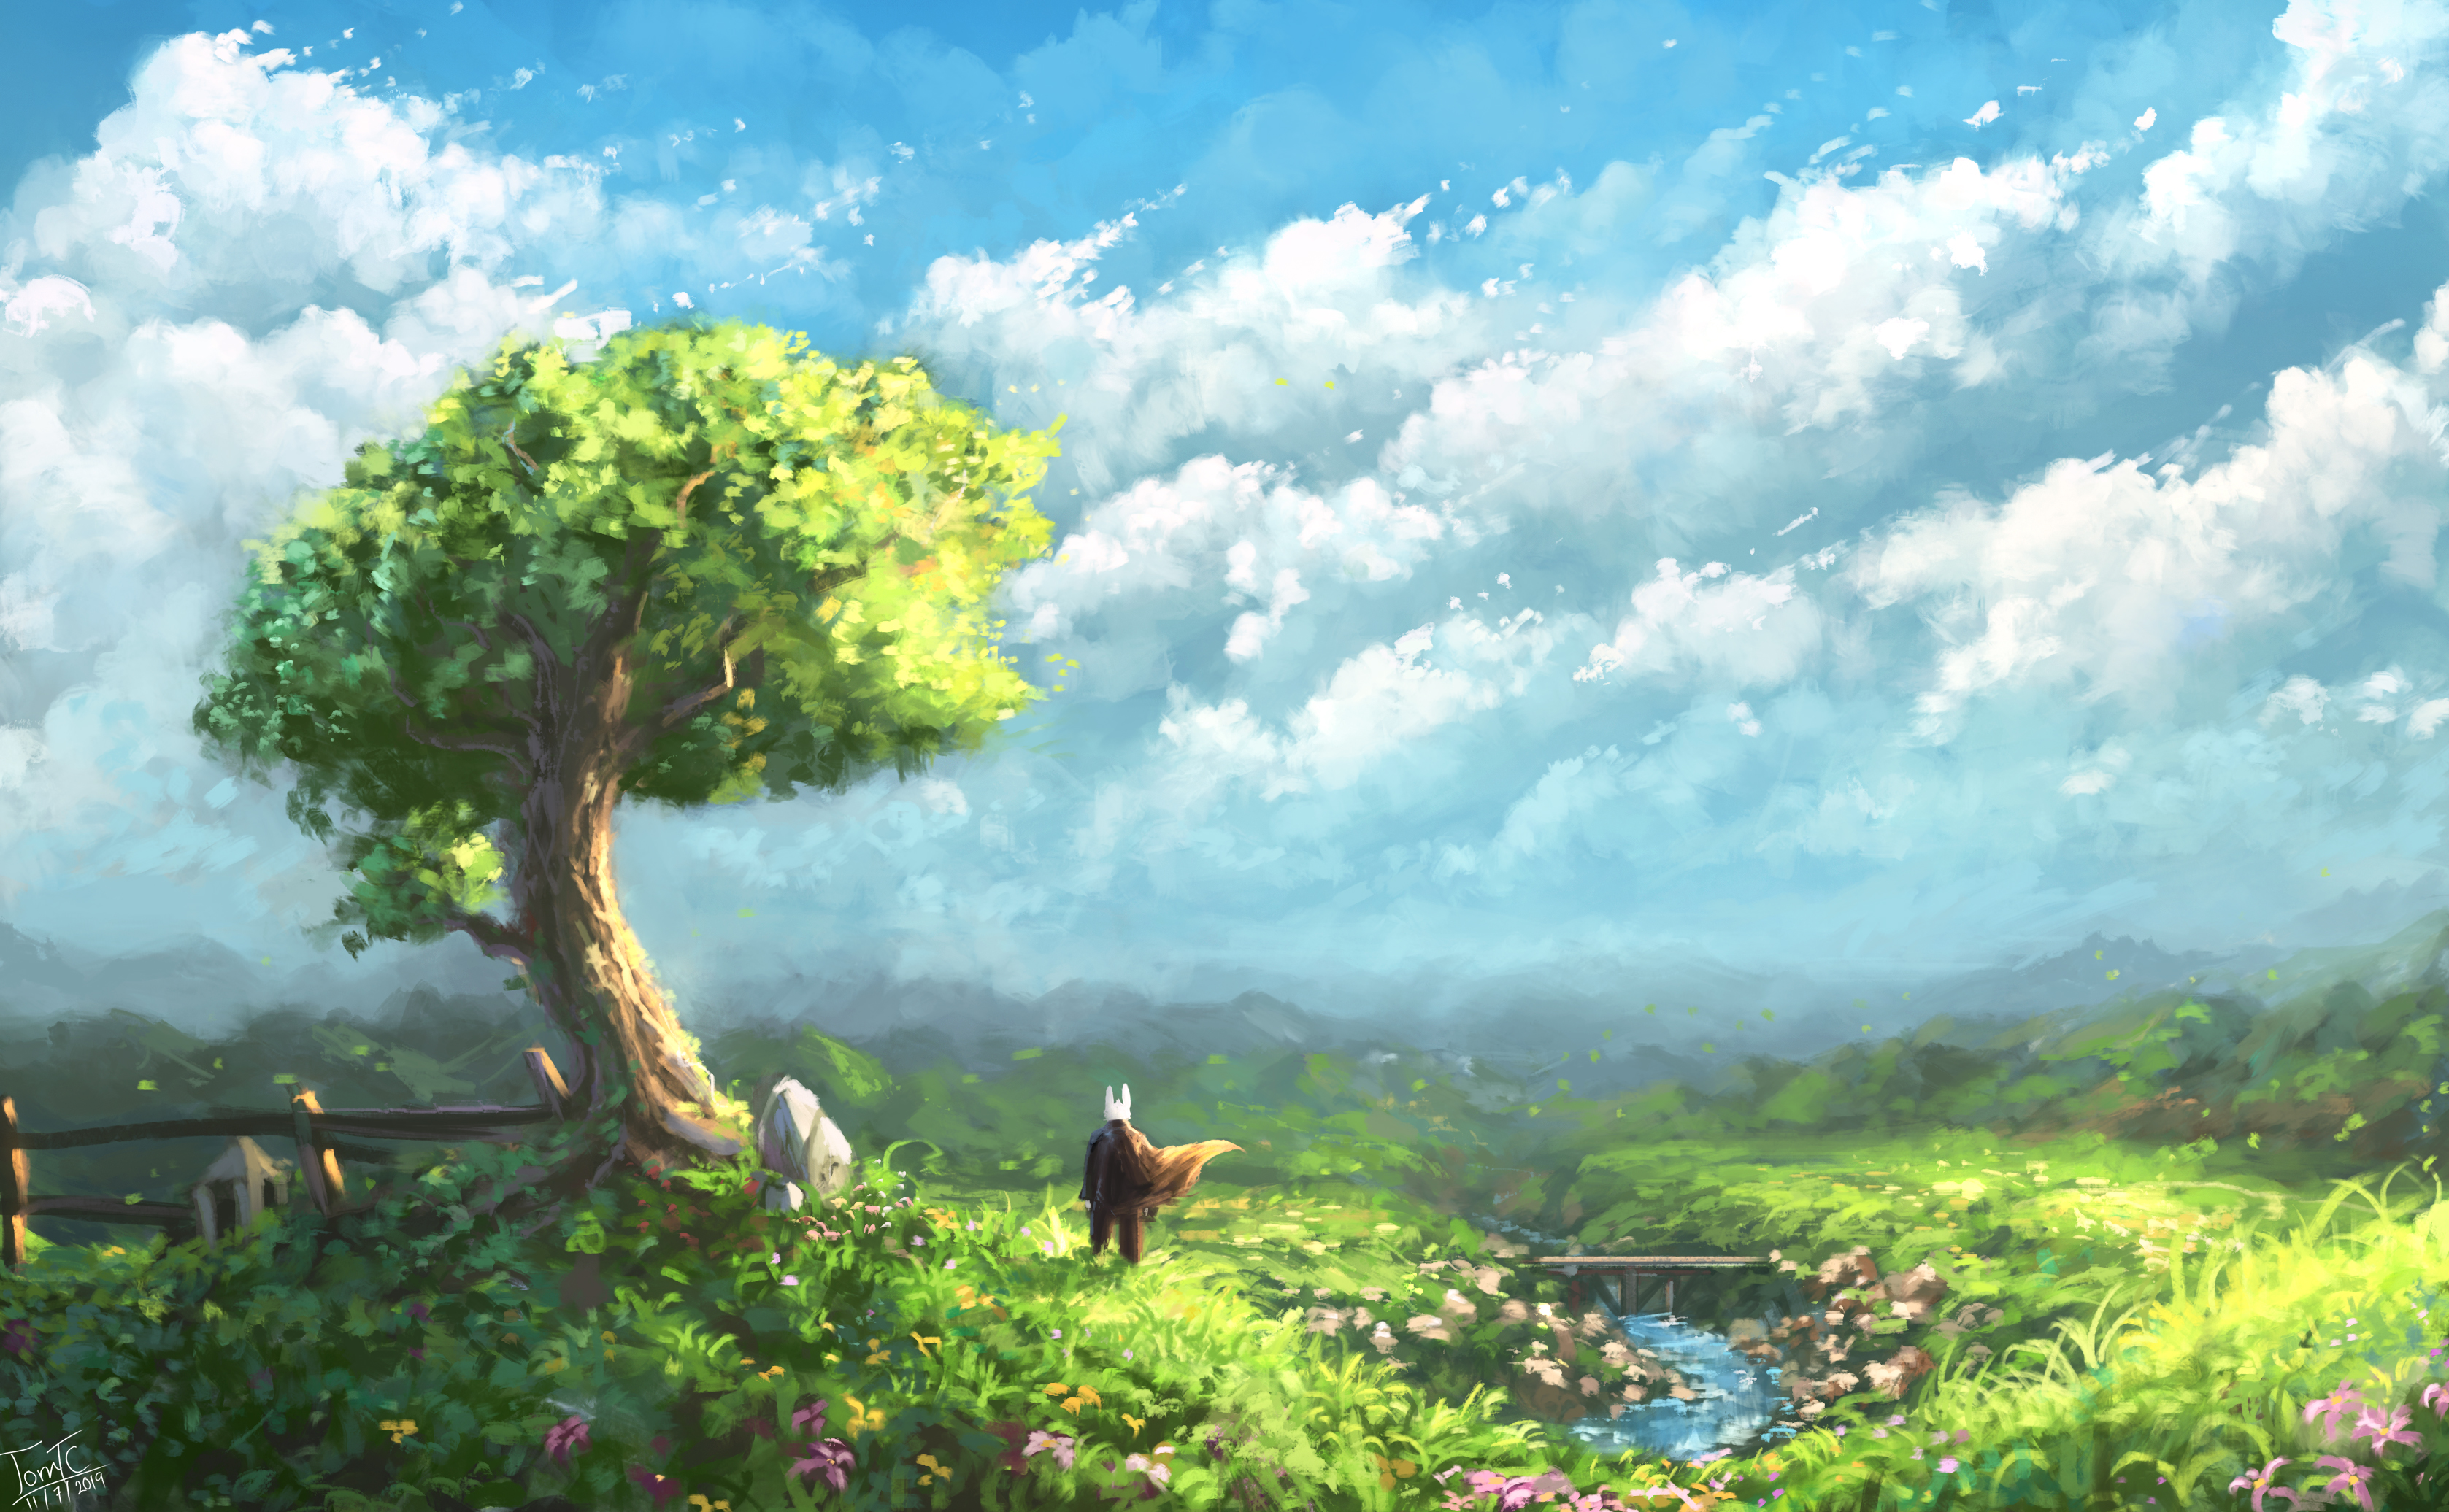 General 3355x2072 digital art artwork drawing digital painting nature landscape trees wood clouds green blue white rabbits silhouette water sky skyscape river rocks pasture environment concept art illustration Tommy Chandra